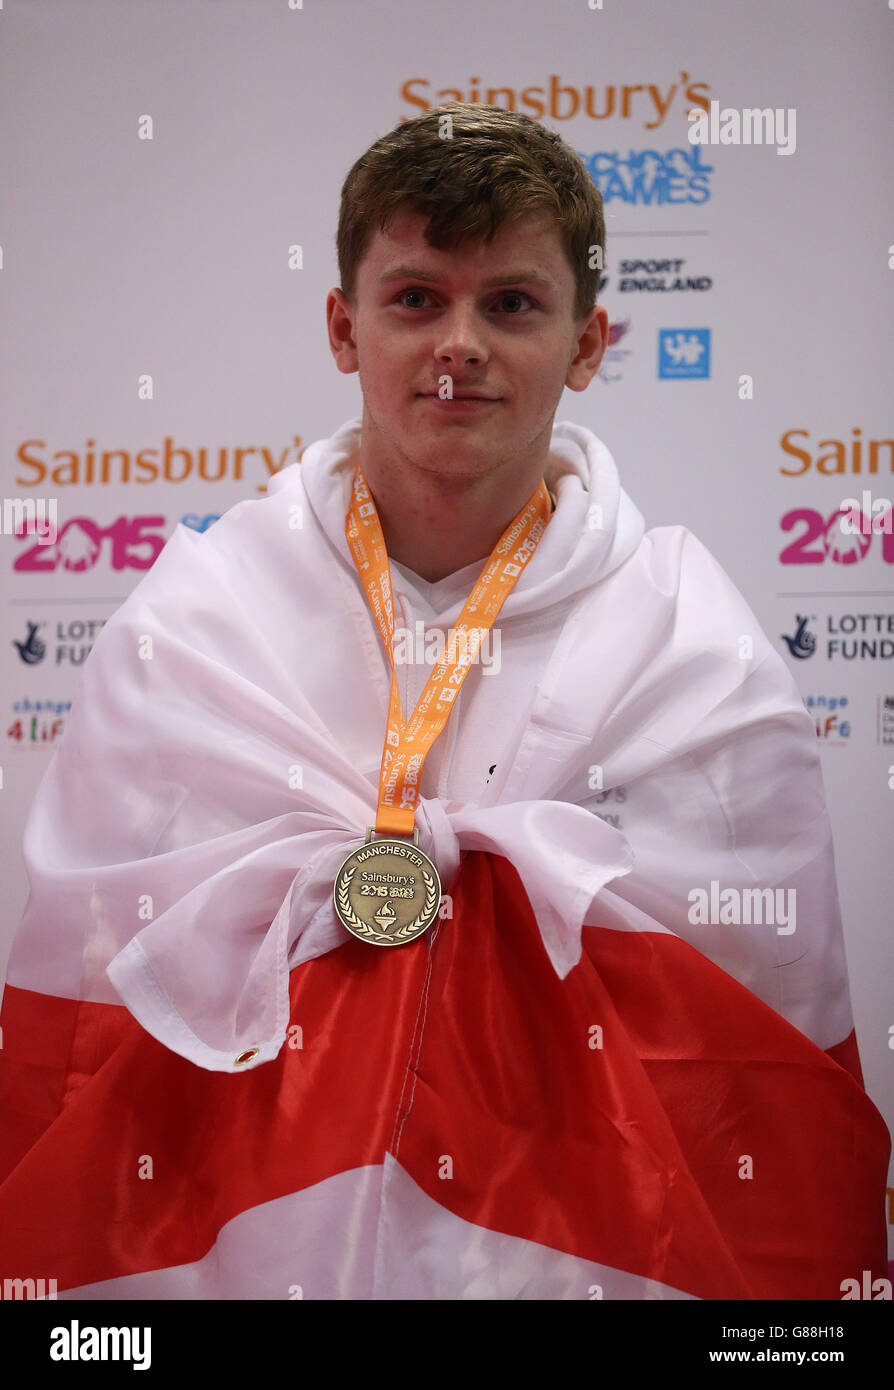 England's Oliver Steed with his gold medal after winning the Men's Epee Final at the fencing during the Sainsbury's 2015 School Games in Manchester. PRESS ASSOCIATION Photo. Picture date: Saturday September 5, 2015. Photo credit should read: Steven Paston/PA Wire Stock Photo